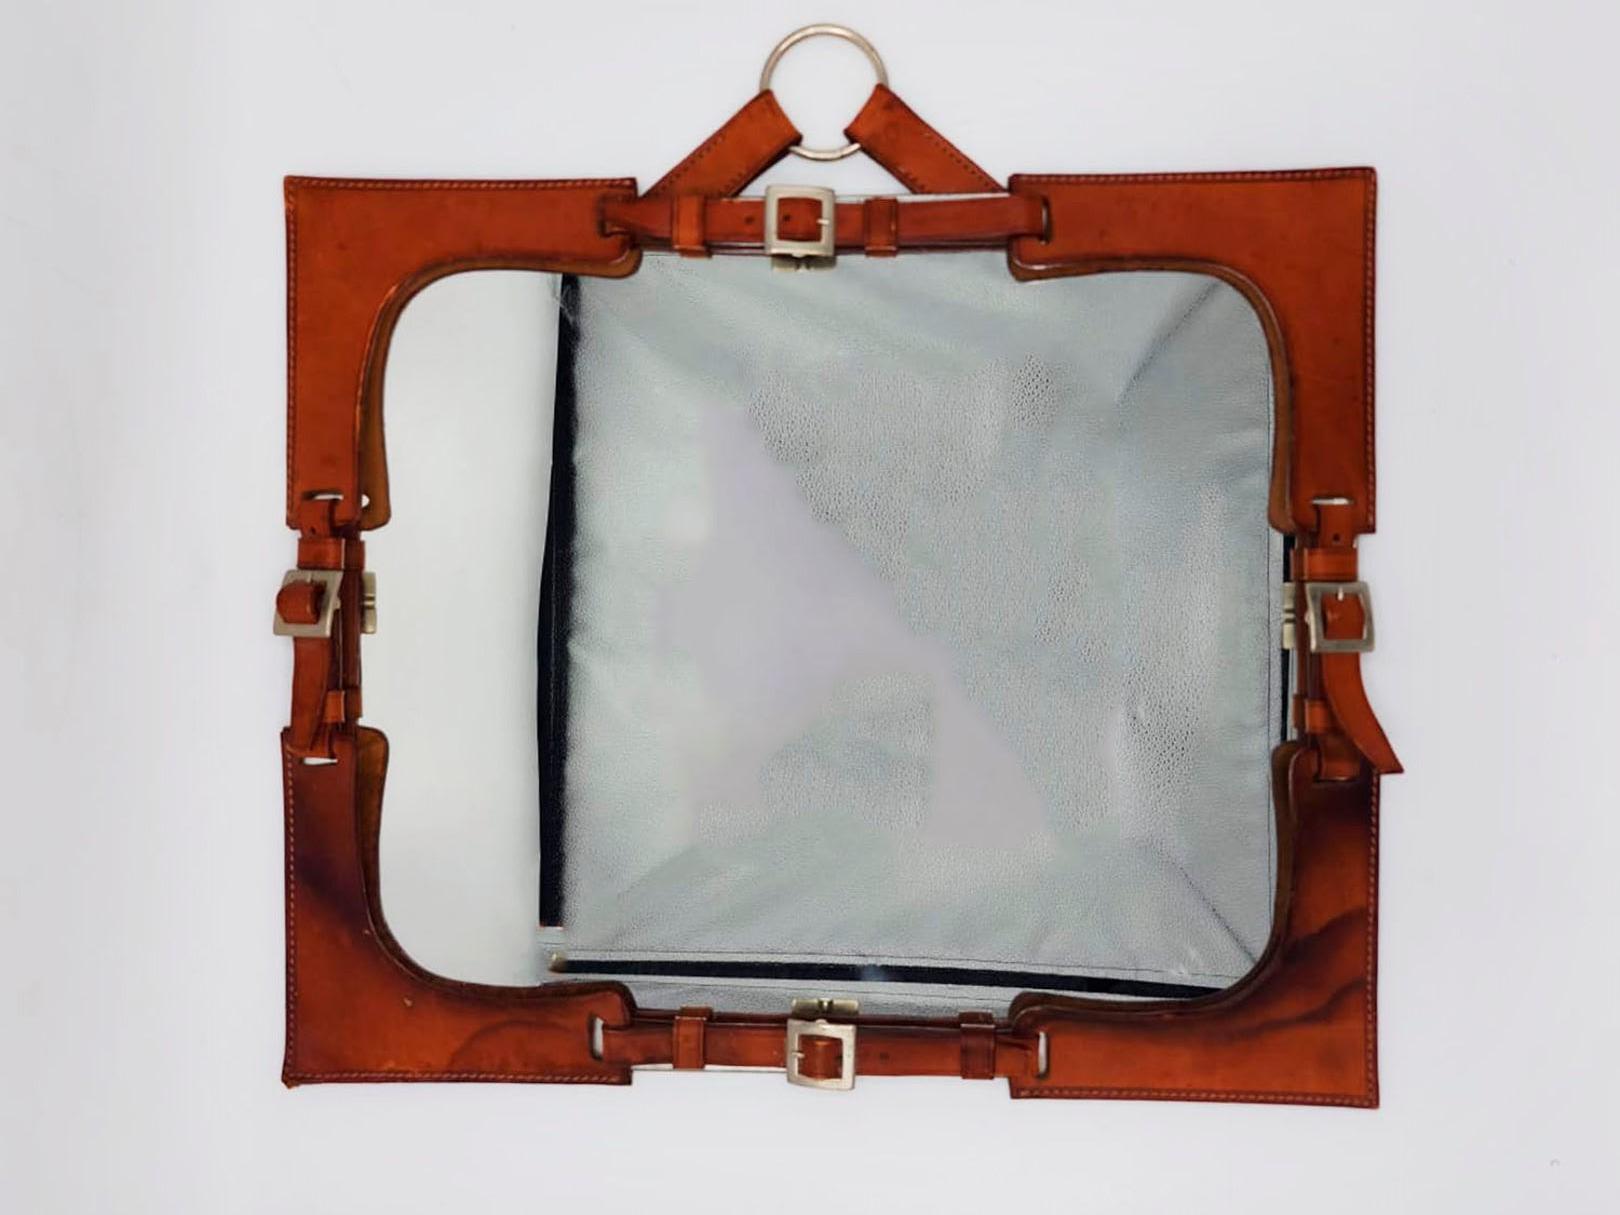 Brown leather mirror in the style of Hermes Paris, 20th Century

Hermes Paris style mirror from 1970, made of rustic style leather, this piece has at each end as if it were hooked with a belt style buckle
Measures:
Height: 46 Centimeters
Length: